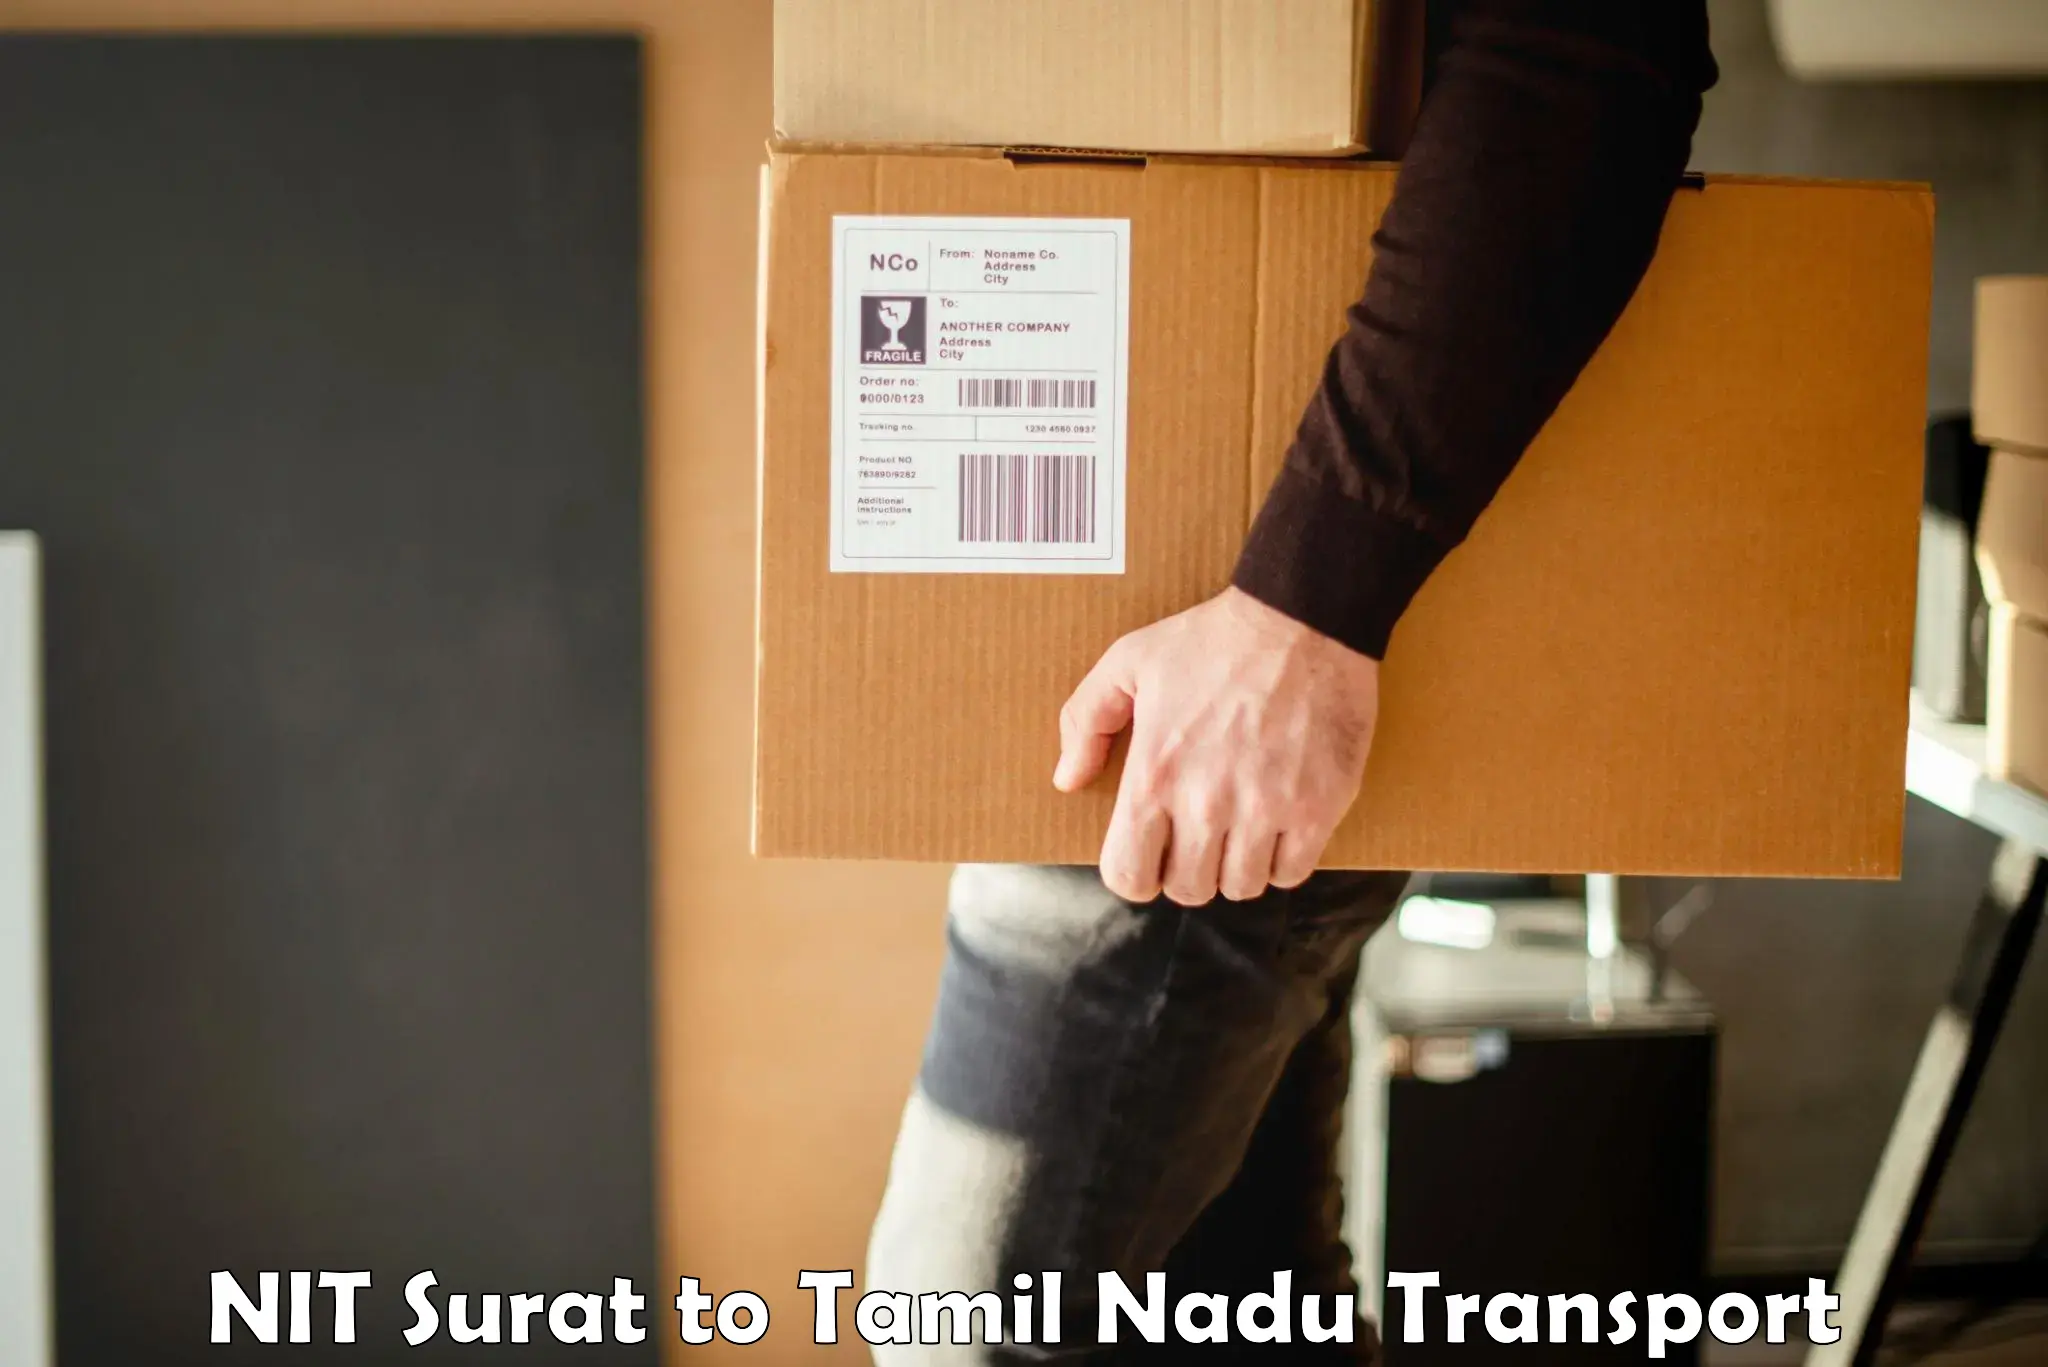 Container transport service NIT Surat to Tamil Nadu